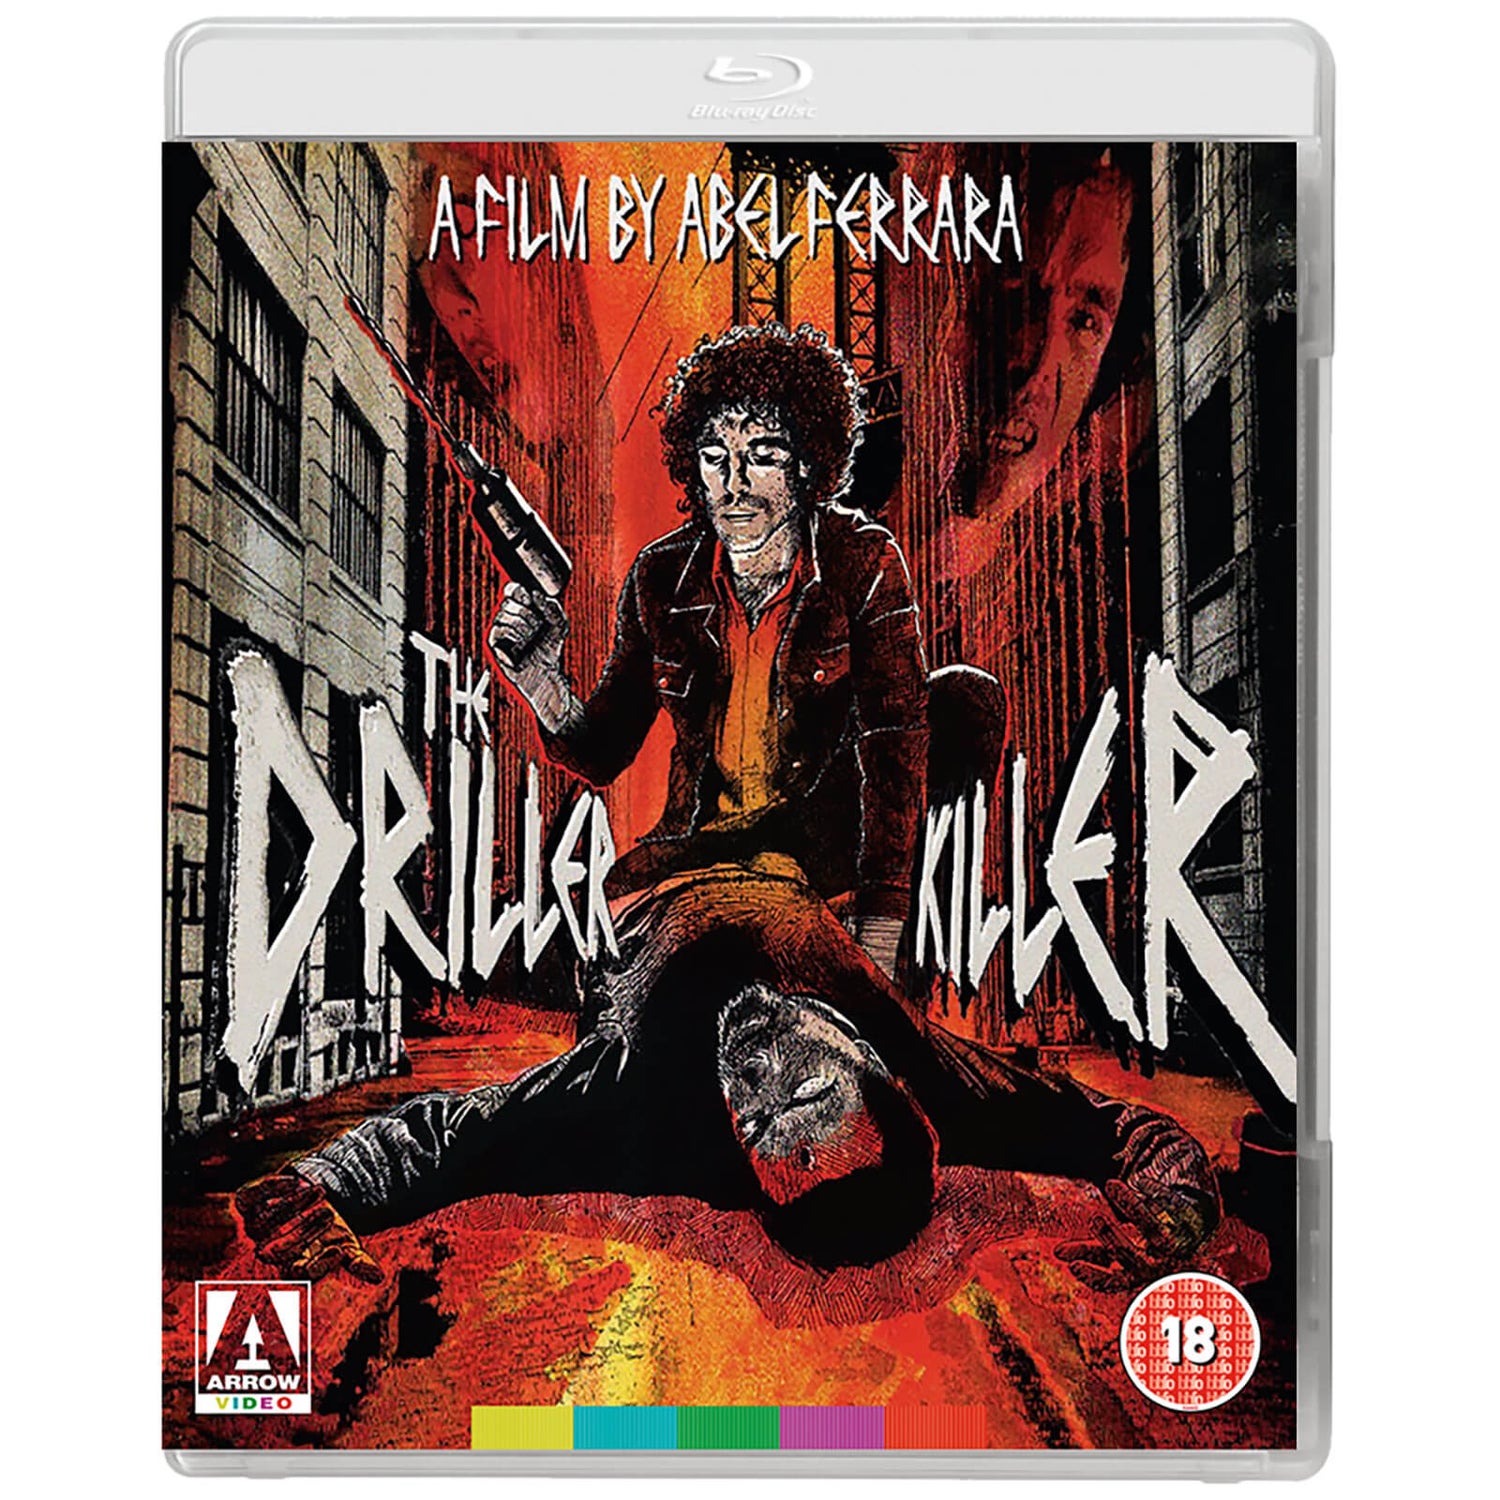 The Driller Killer - Dual Format (Includes DVD)